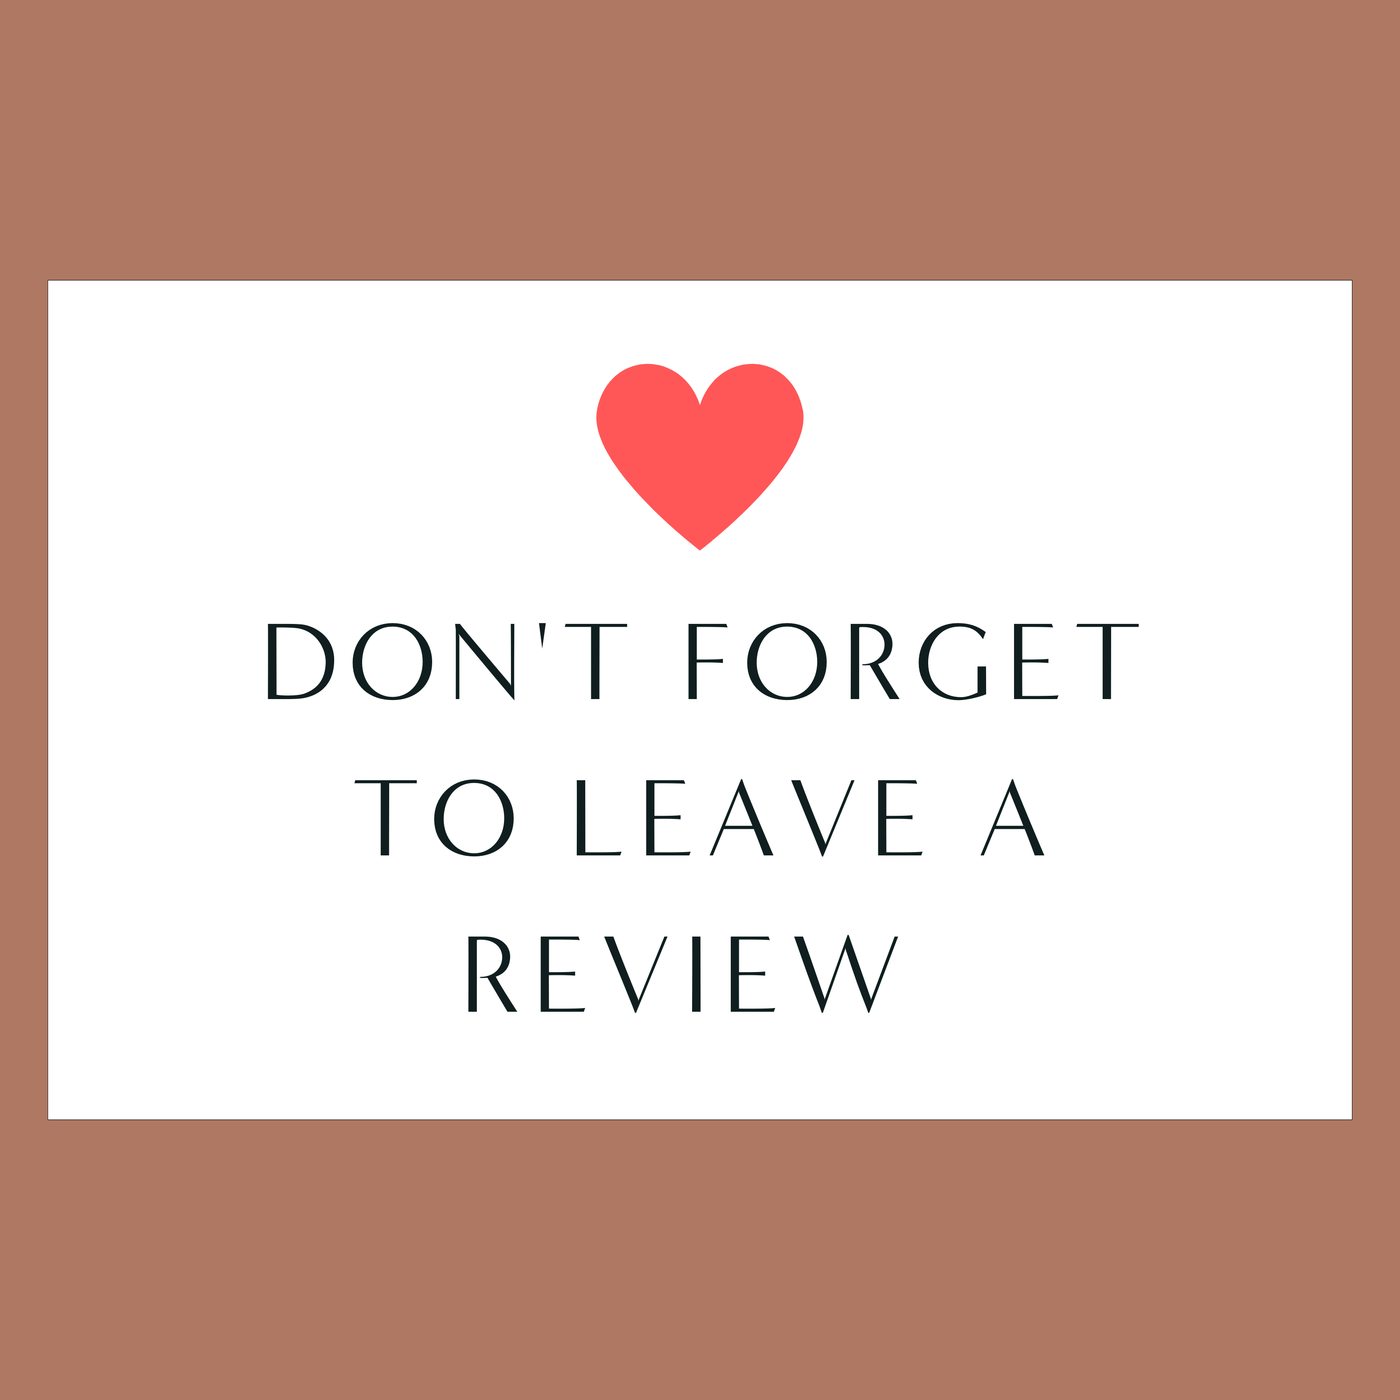 Don't forget to leave a review with heart emoji